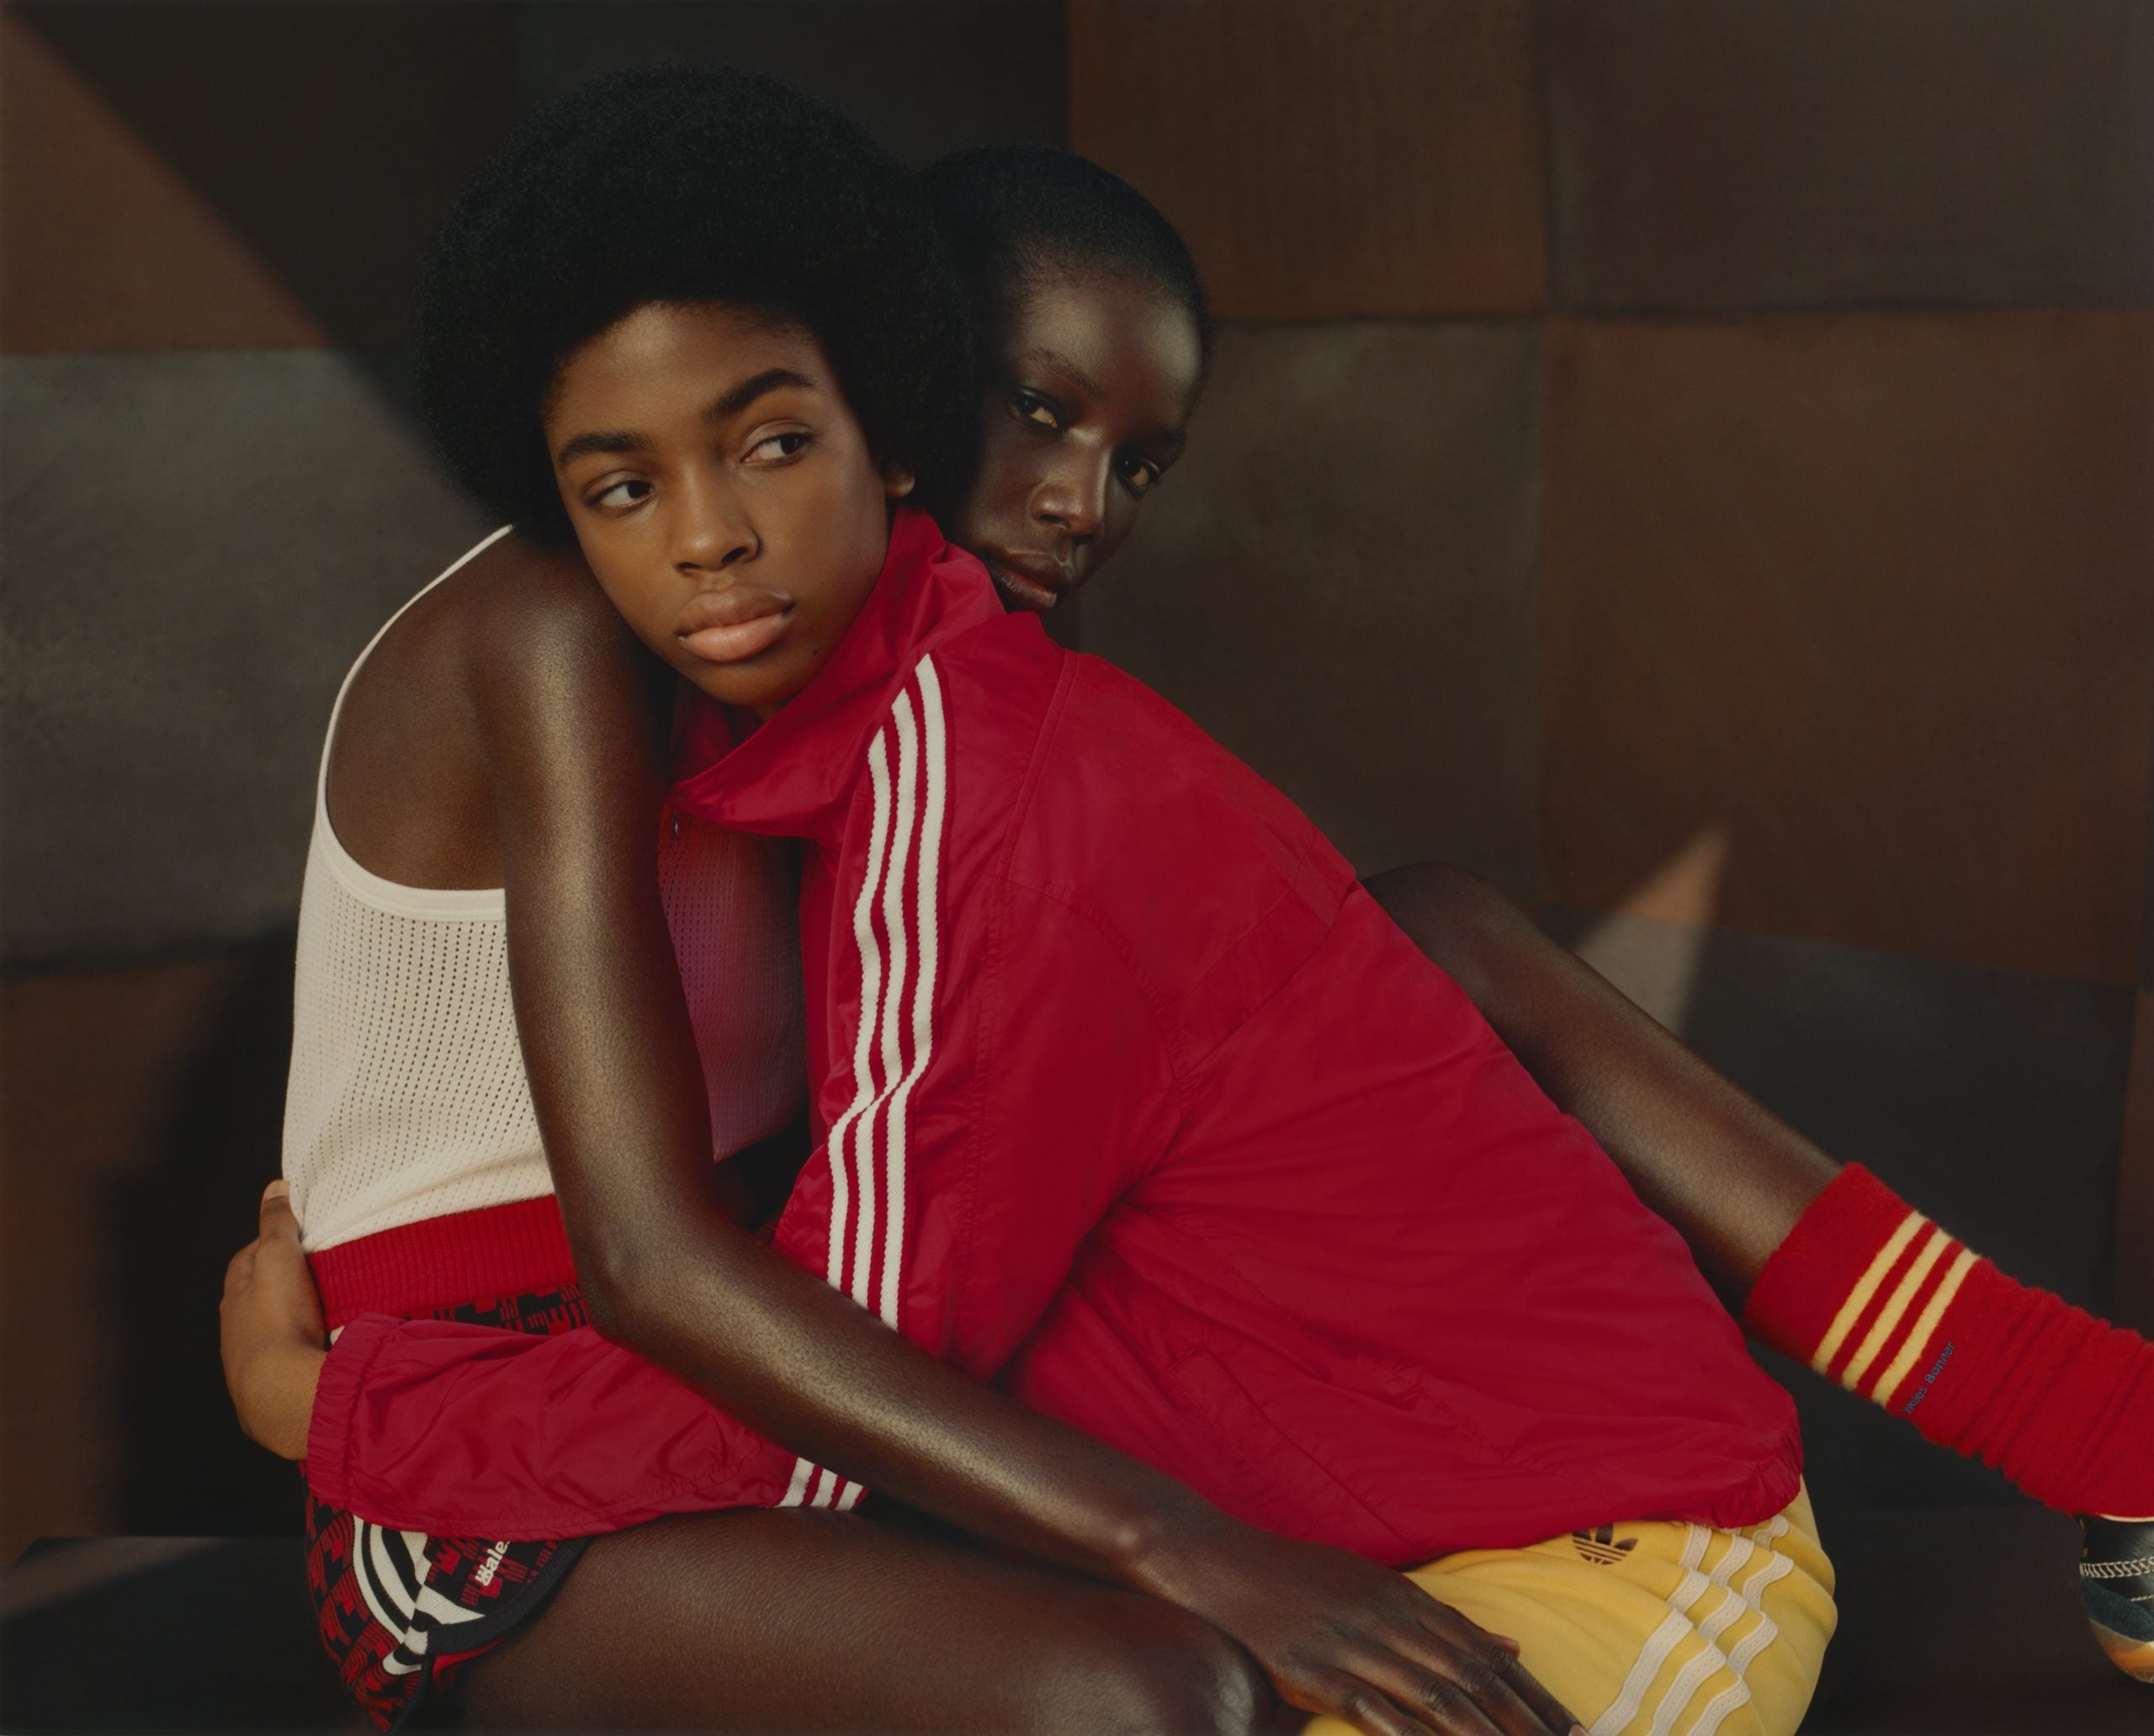 Wales Bonner & Adidas Continue Their Ongoing Collaboration With S/S 22′ Collection